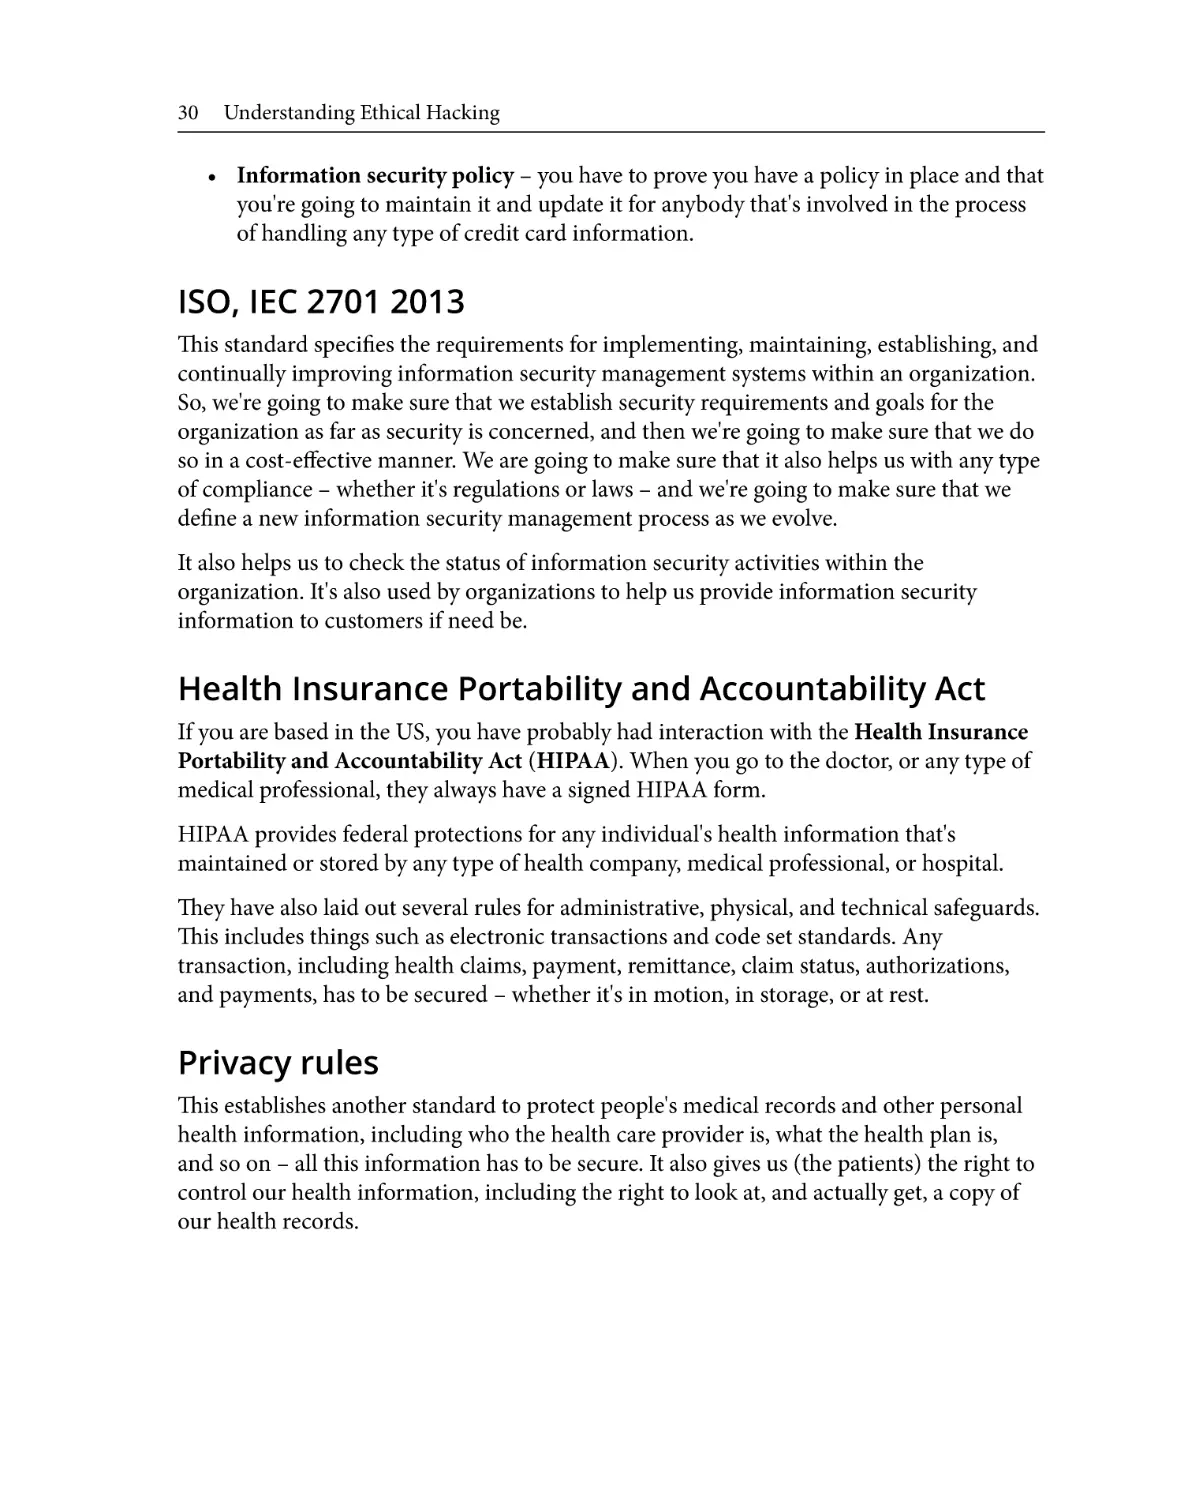 ISO, IEC 2701 2013
Health Insurance Portability and Accountability Act
Privacy rules